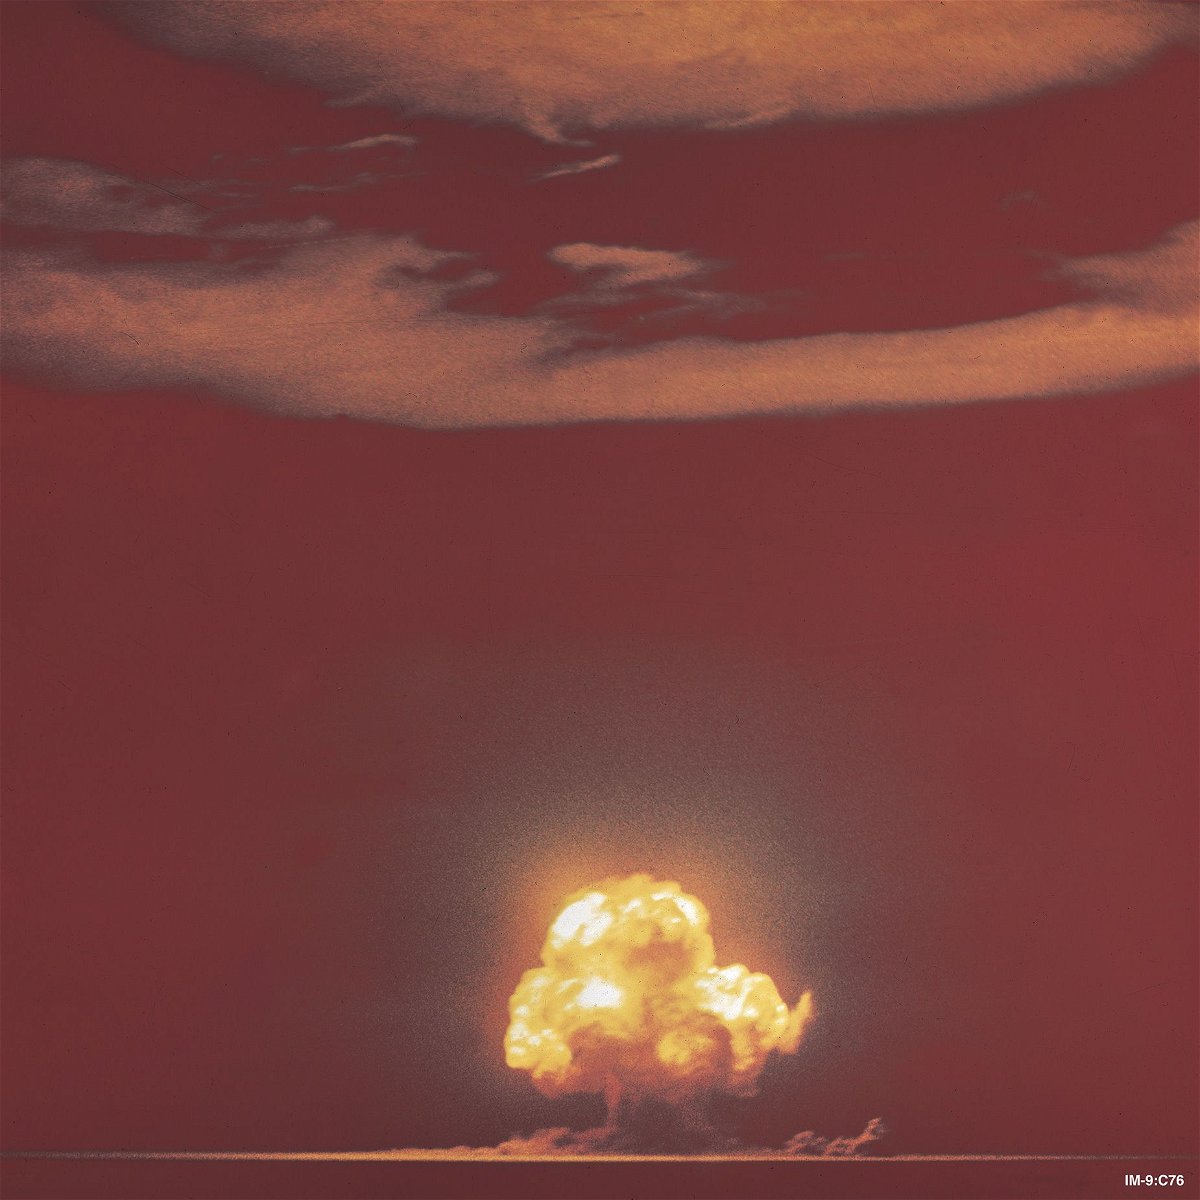 A color photograph of the Trinity mushroom cloud from July 16, 1945 -- and the world would never be the same.